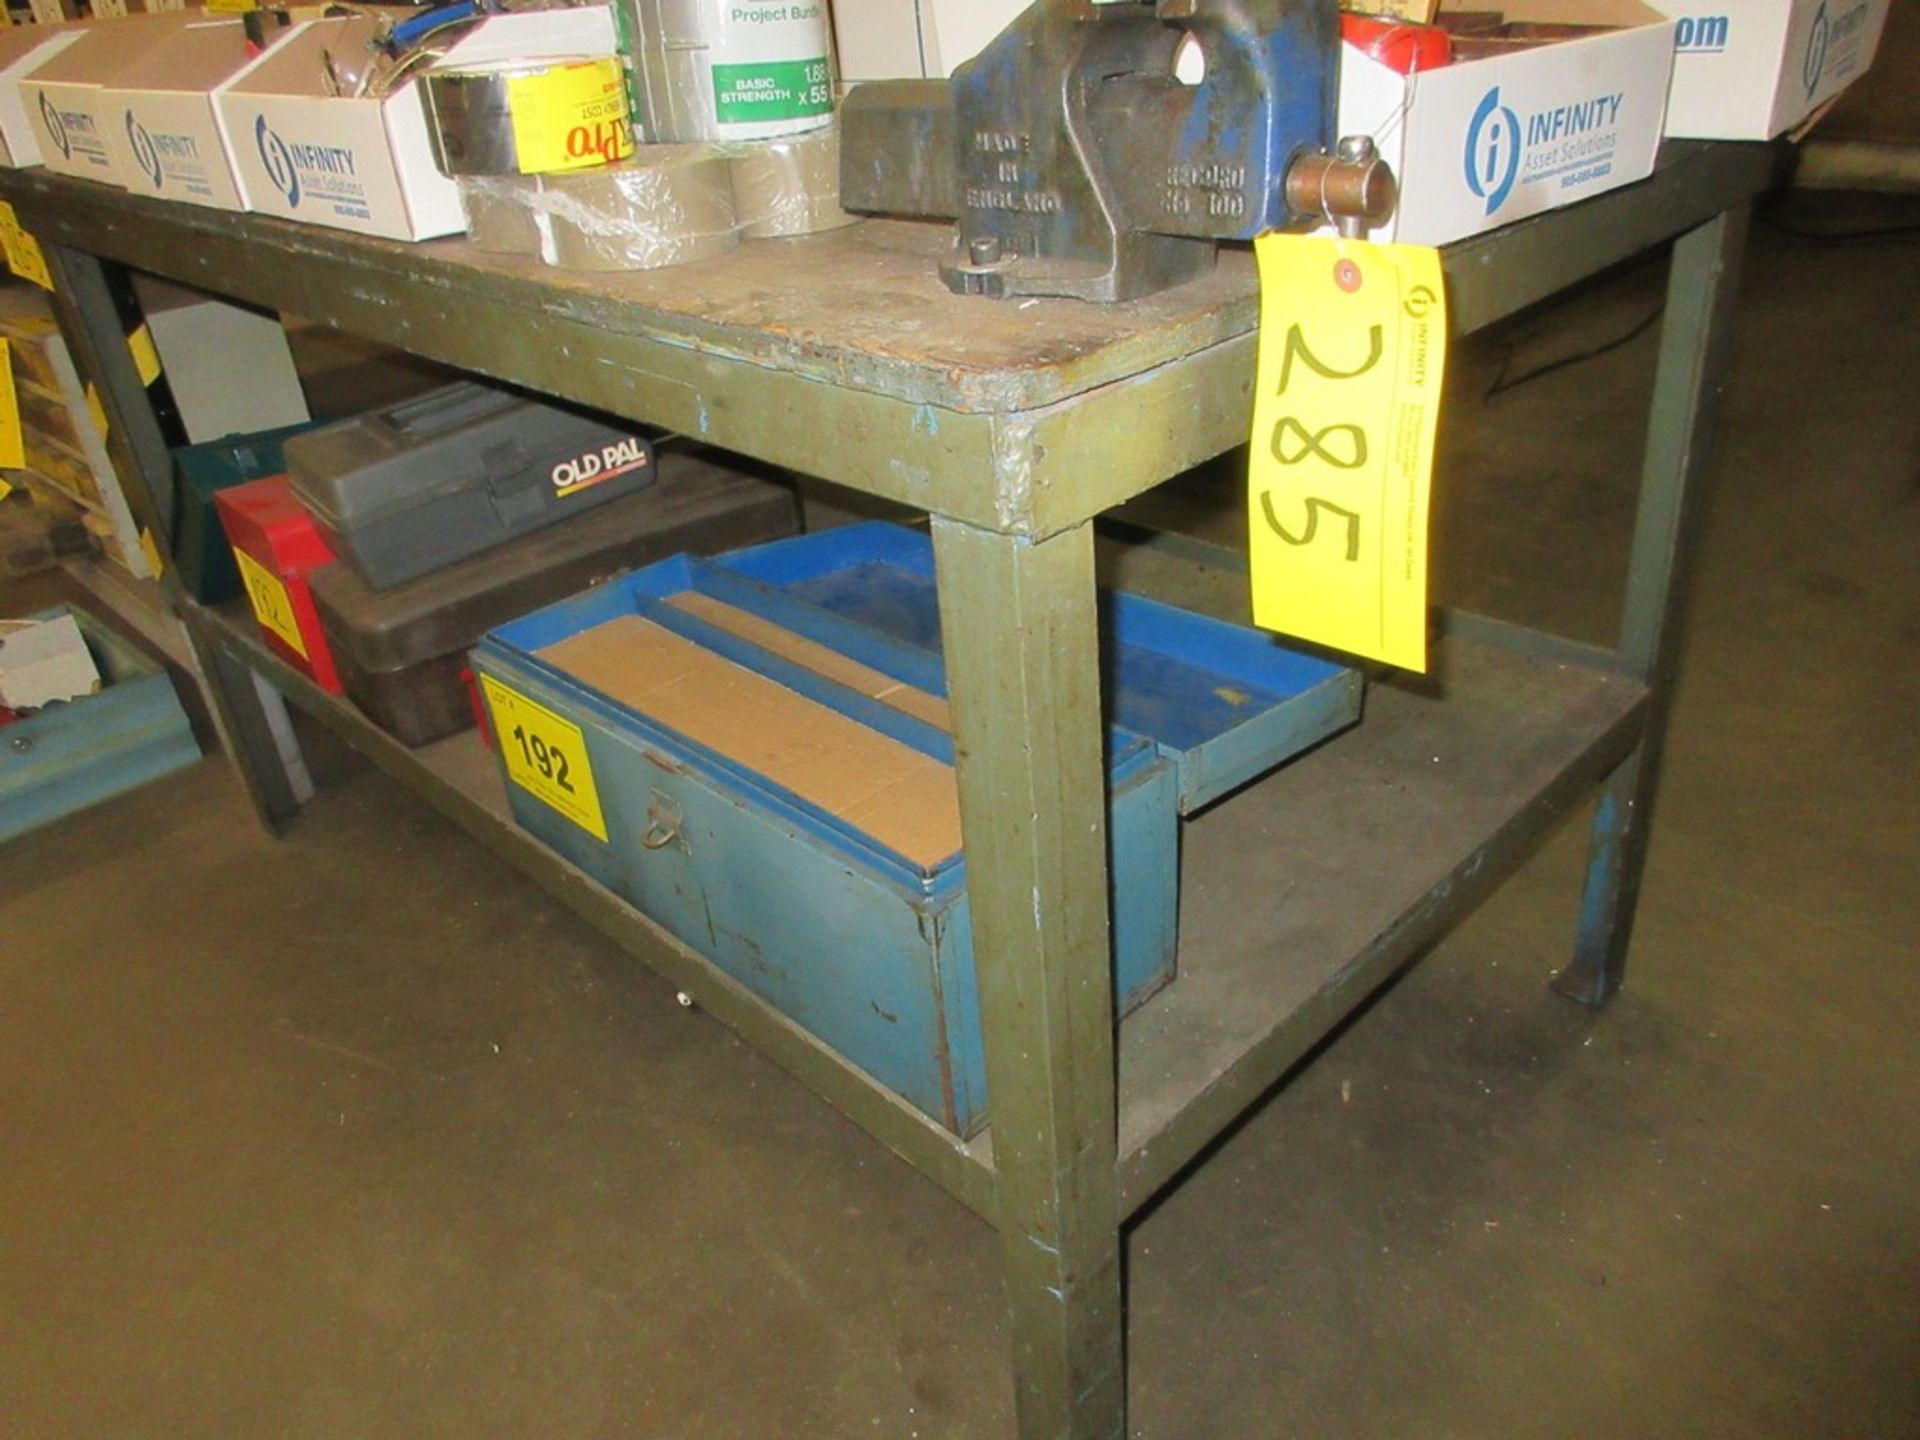 LOT OF (2) 2-LEVEL WORKBENCHES, APPROX. 34"D X 5'L W/ CAT 40 VISE AND 4" BENCH VISE, 42"D X 6'L (